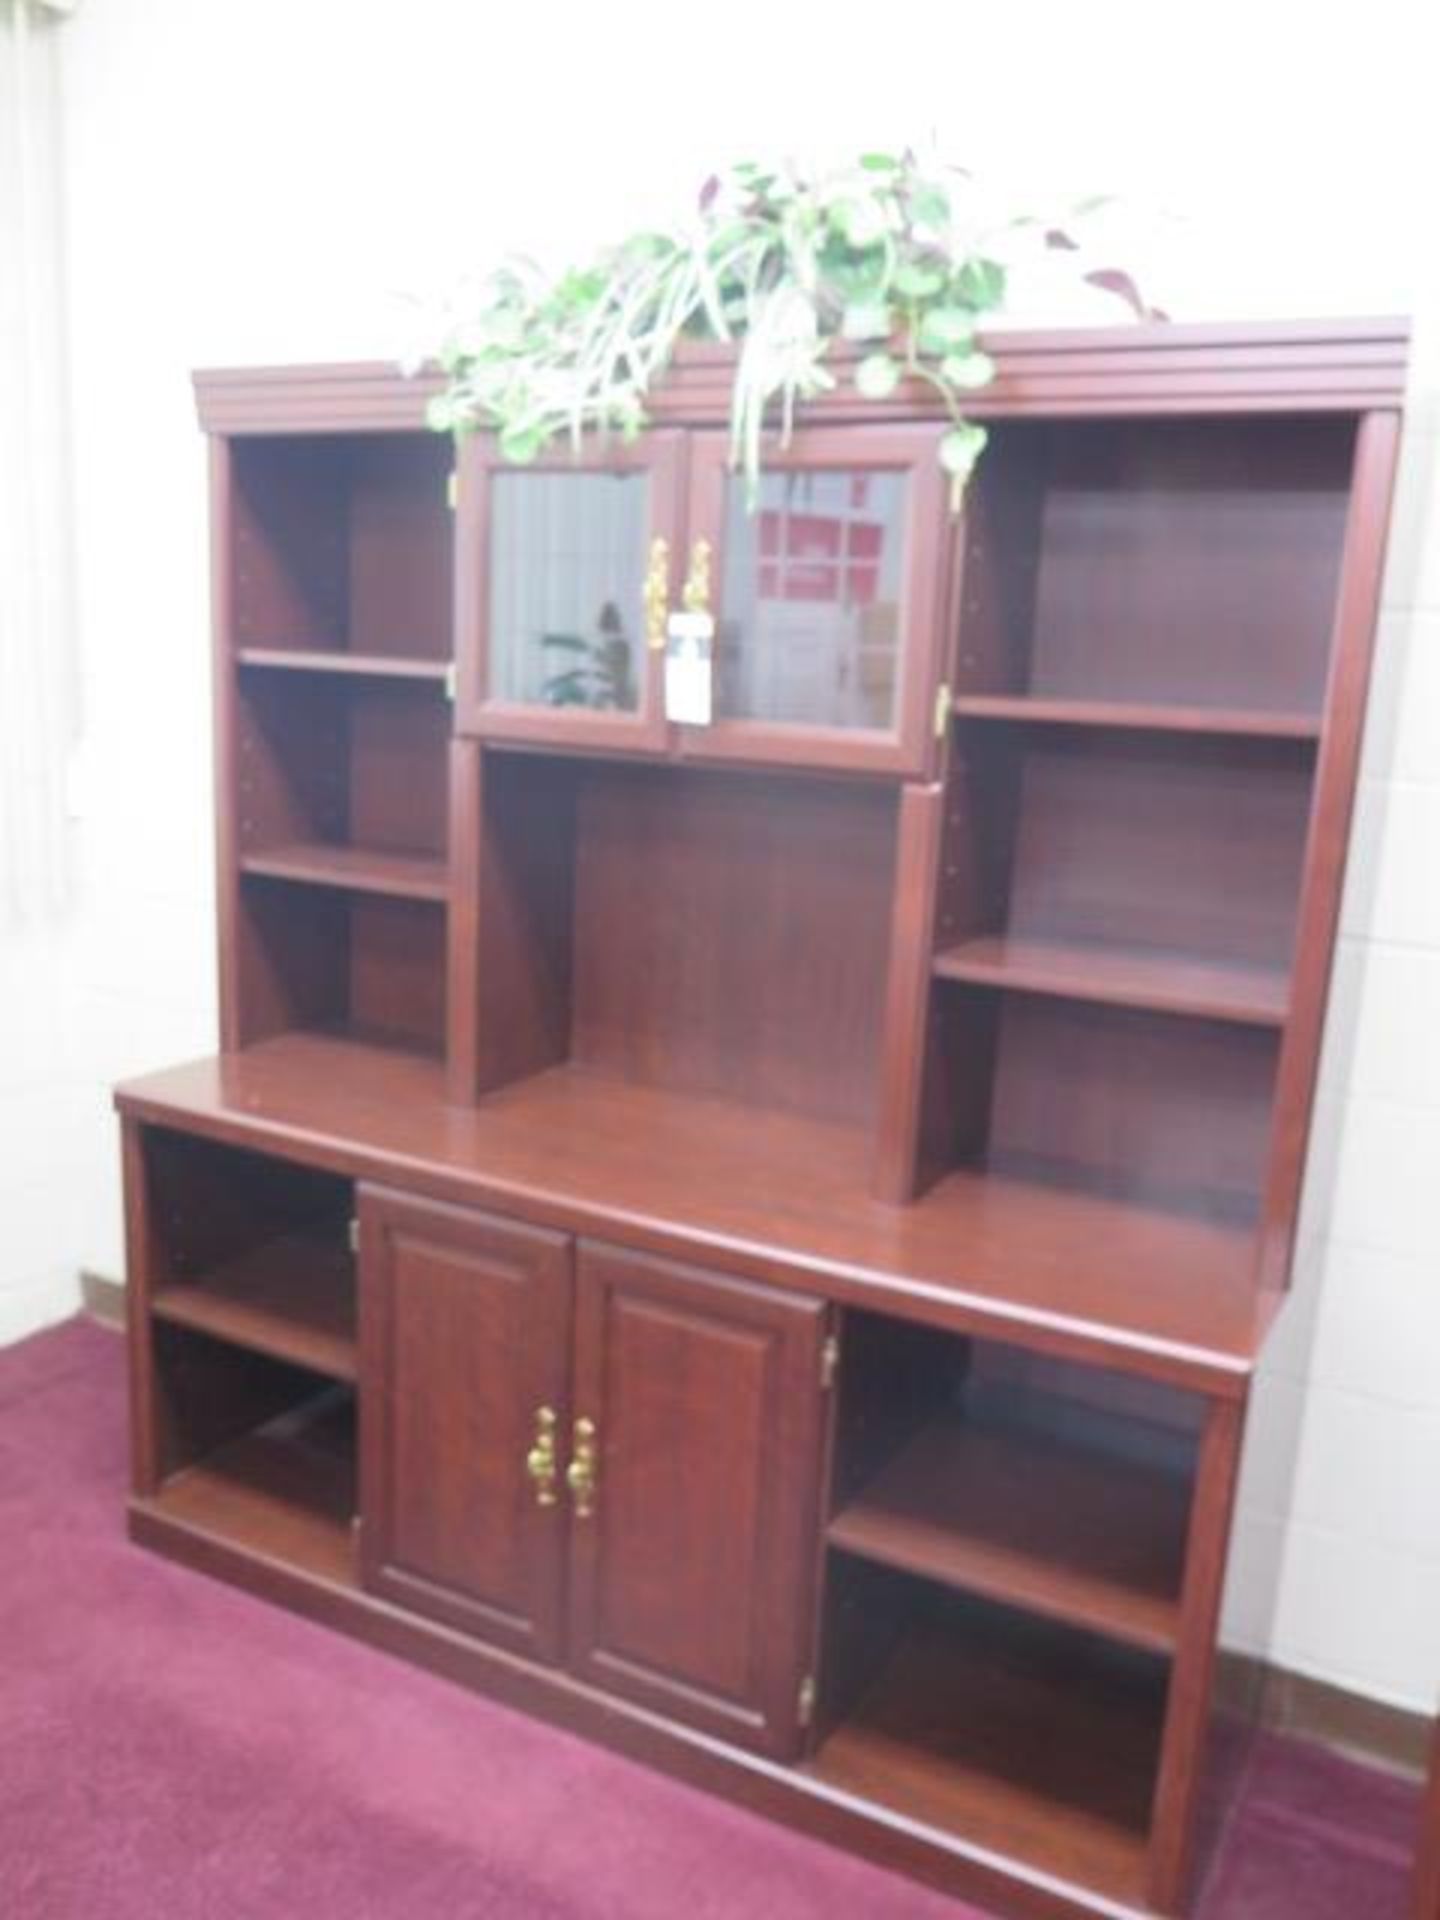 Execitive Desk, Credenza, Cabinet and File Cabinet (SOLD AS-IS - NO WARRANTY) - Image 2 of 5